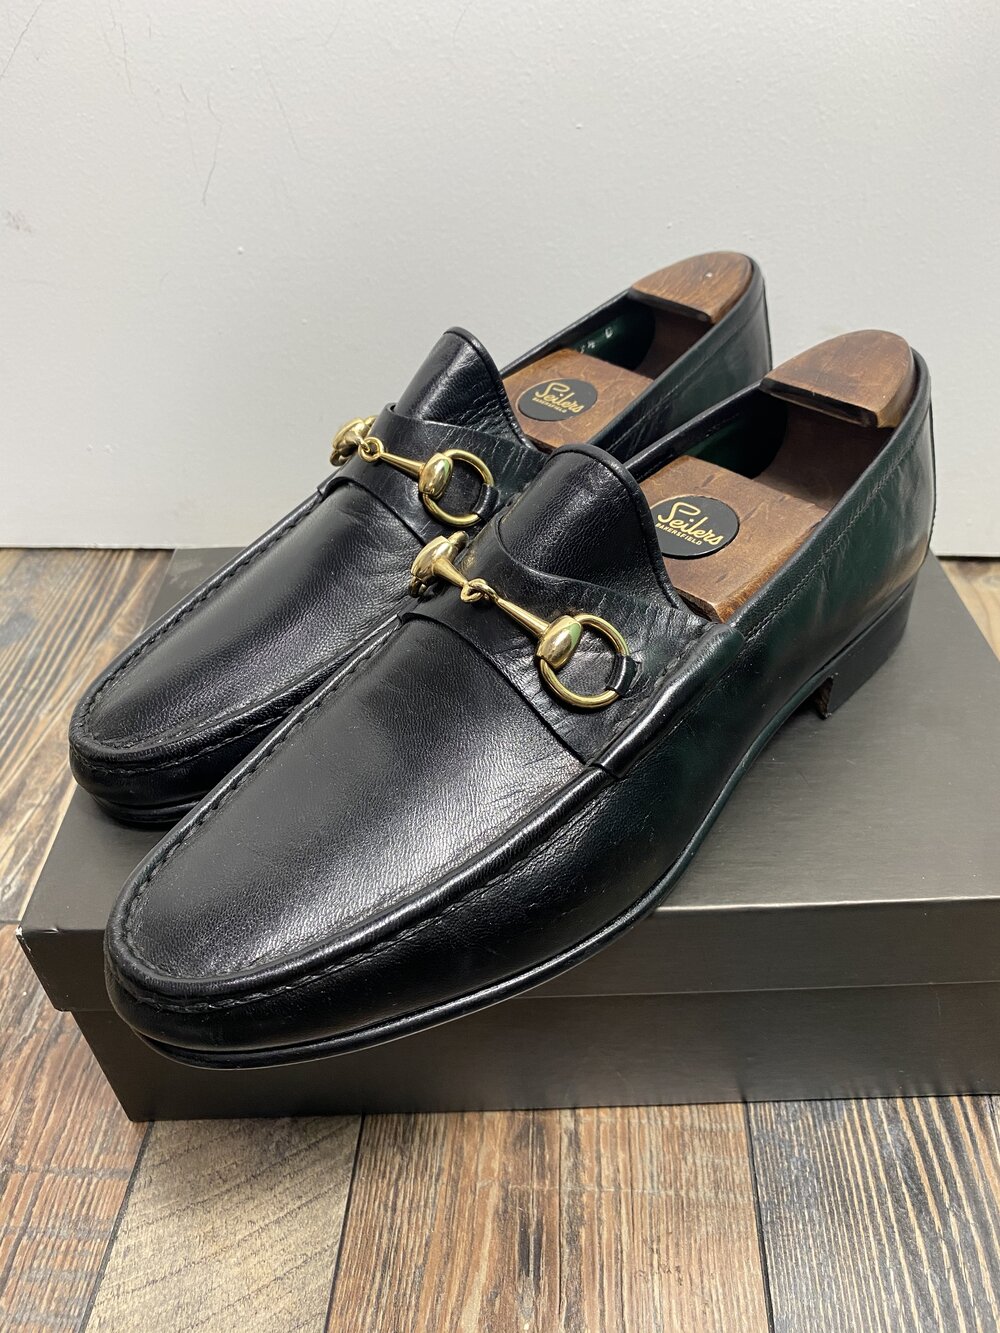 Gucci Dress Shoes — In Your Wildest Dreams